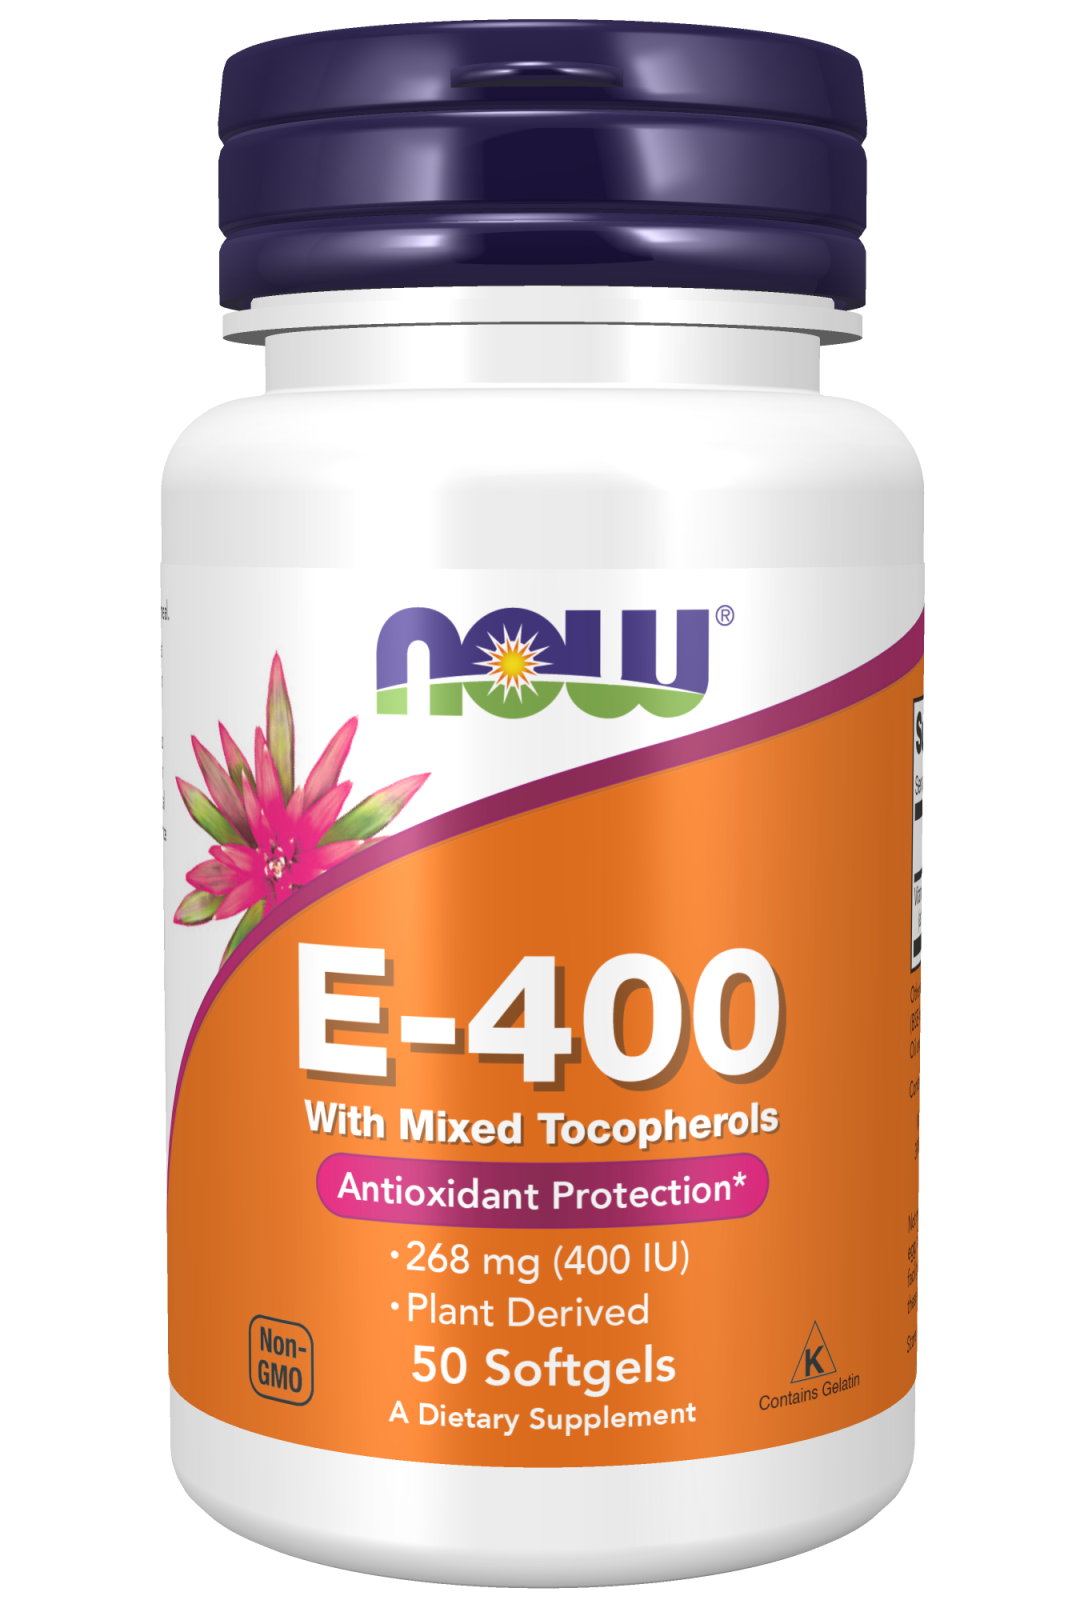 Vitamin E-400 With Mixed Tocopherols - 50 Softgels Bottle Front